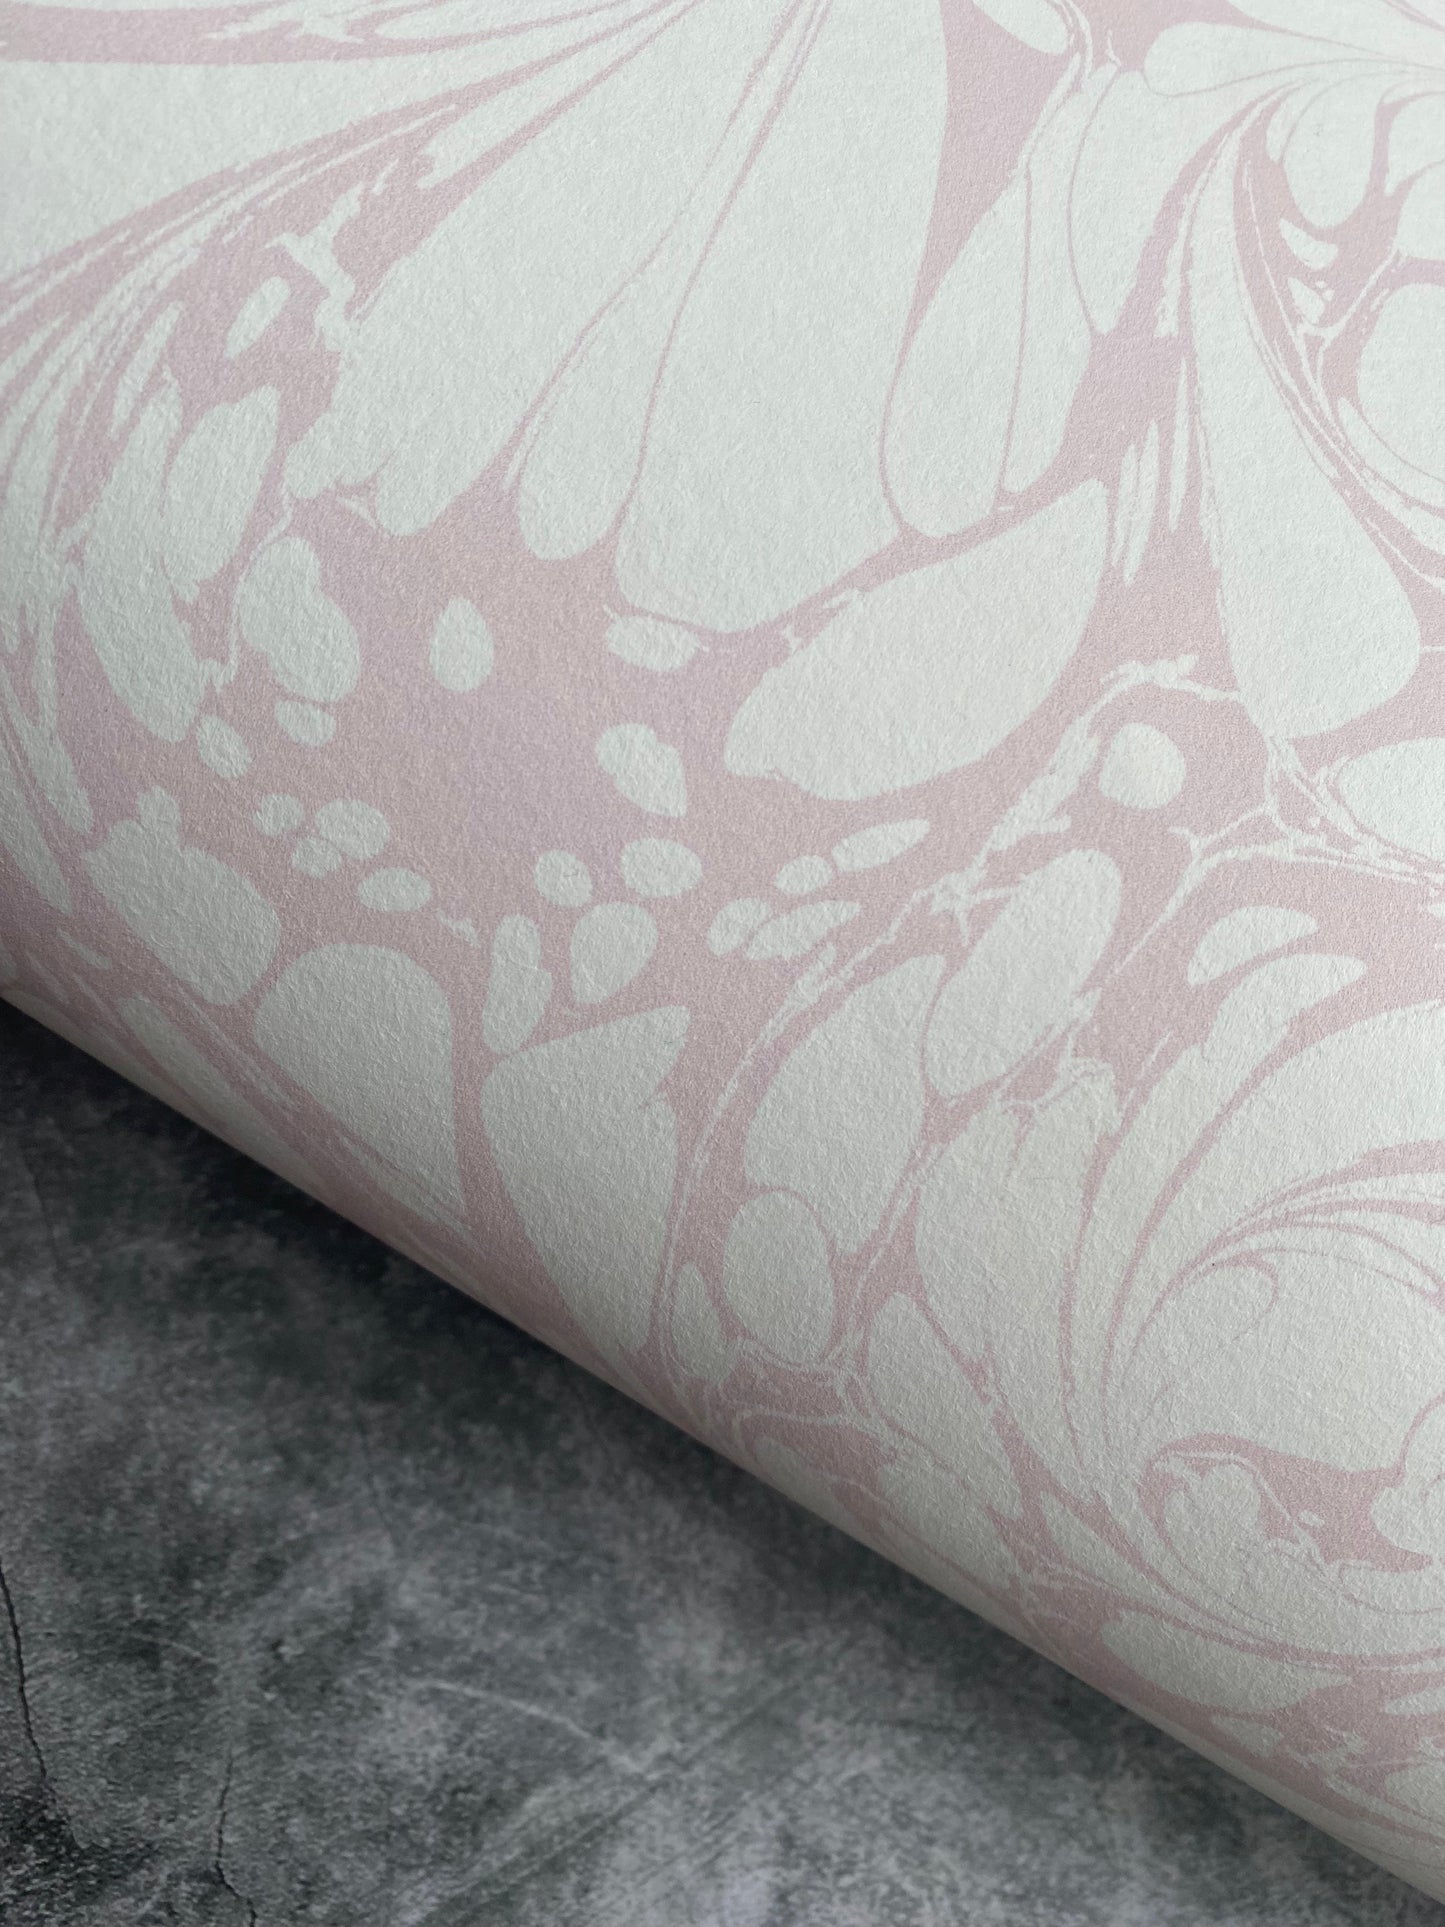 In Stock: Printed Wallpaper - 'Flourish' Col: Candytuft - Eco Non-Woven